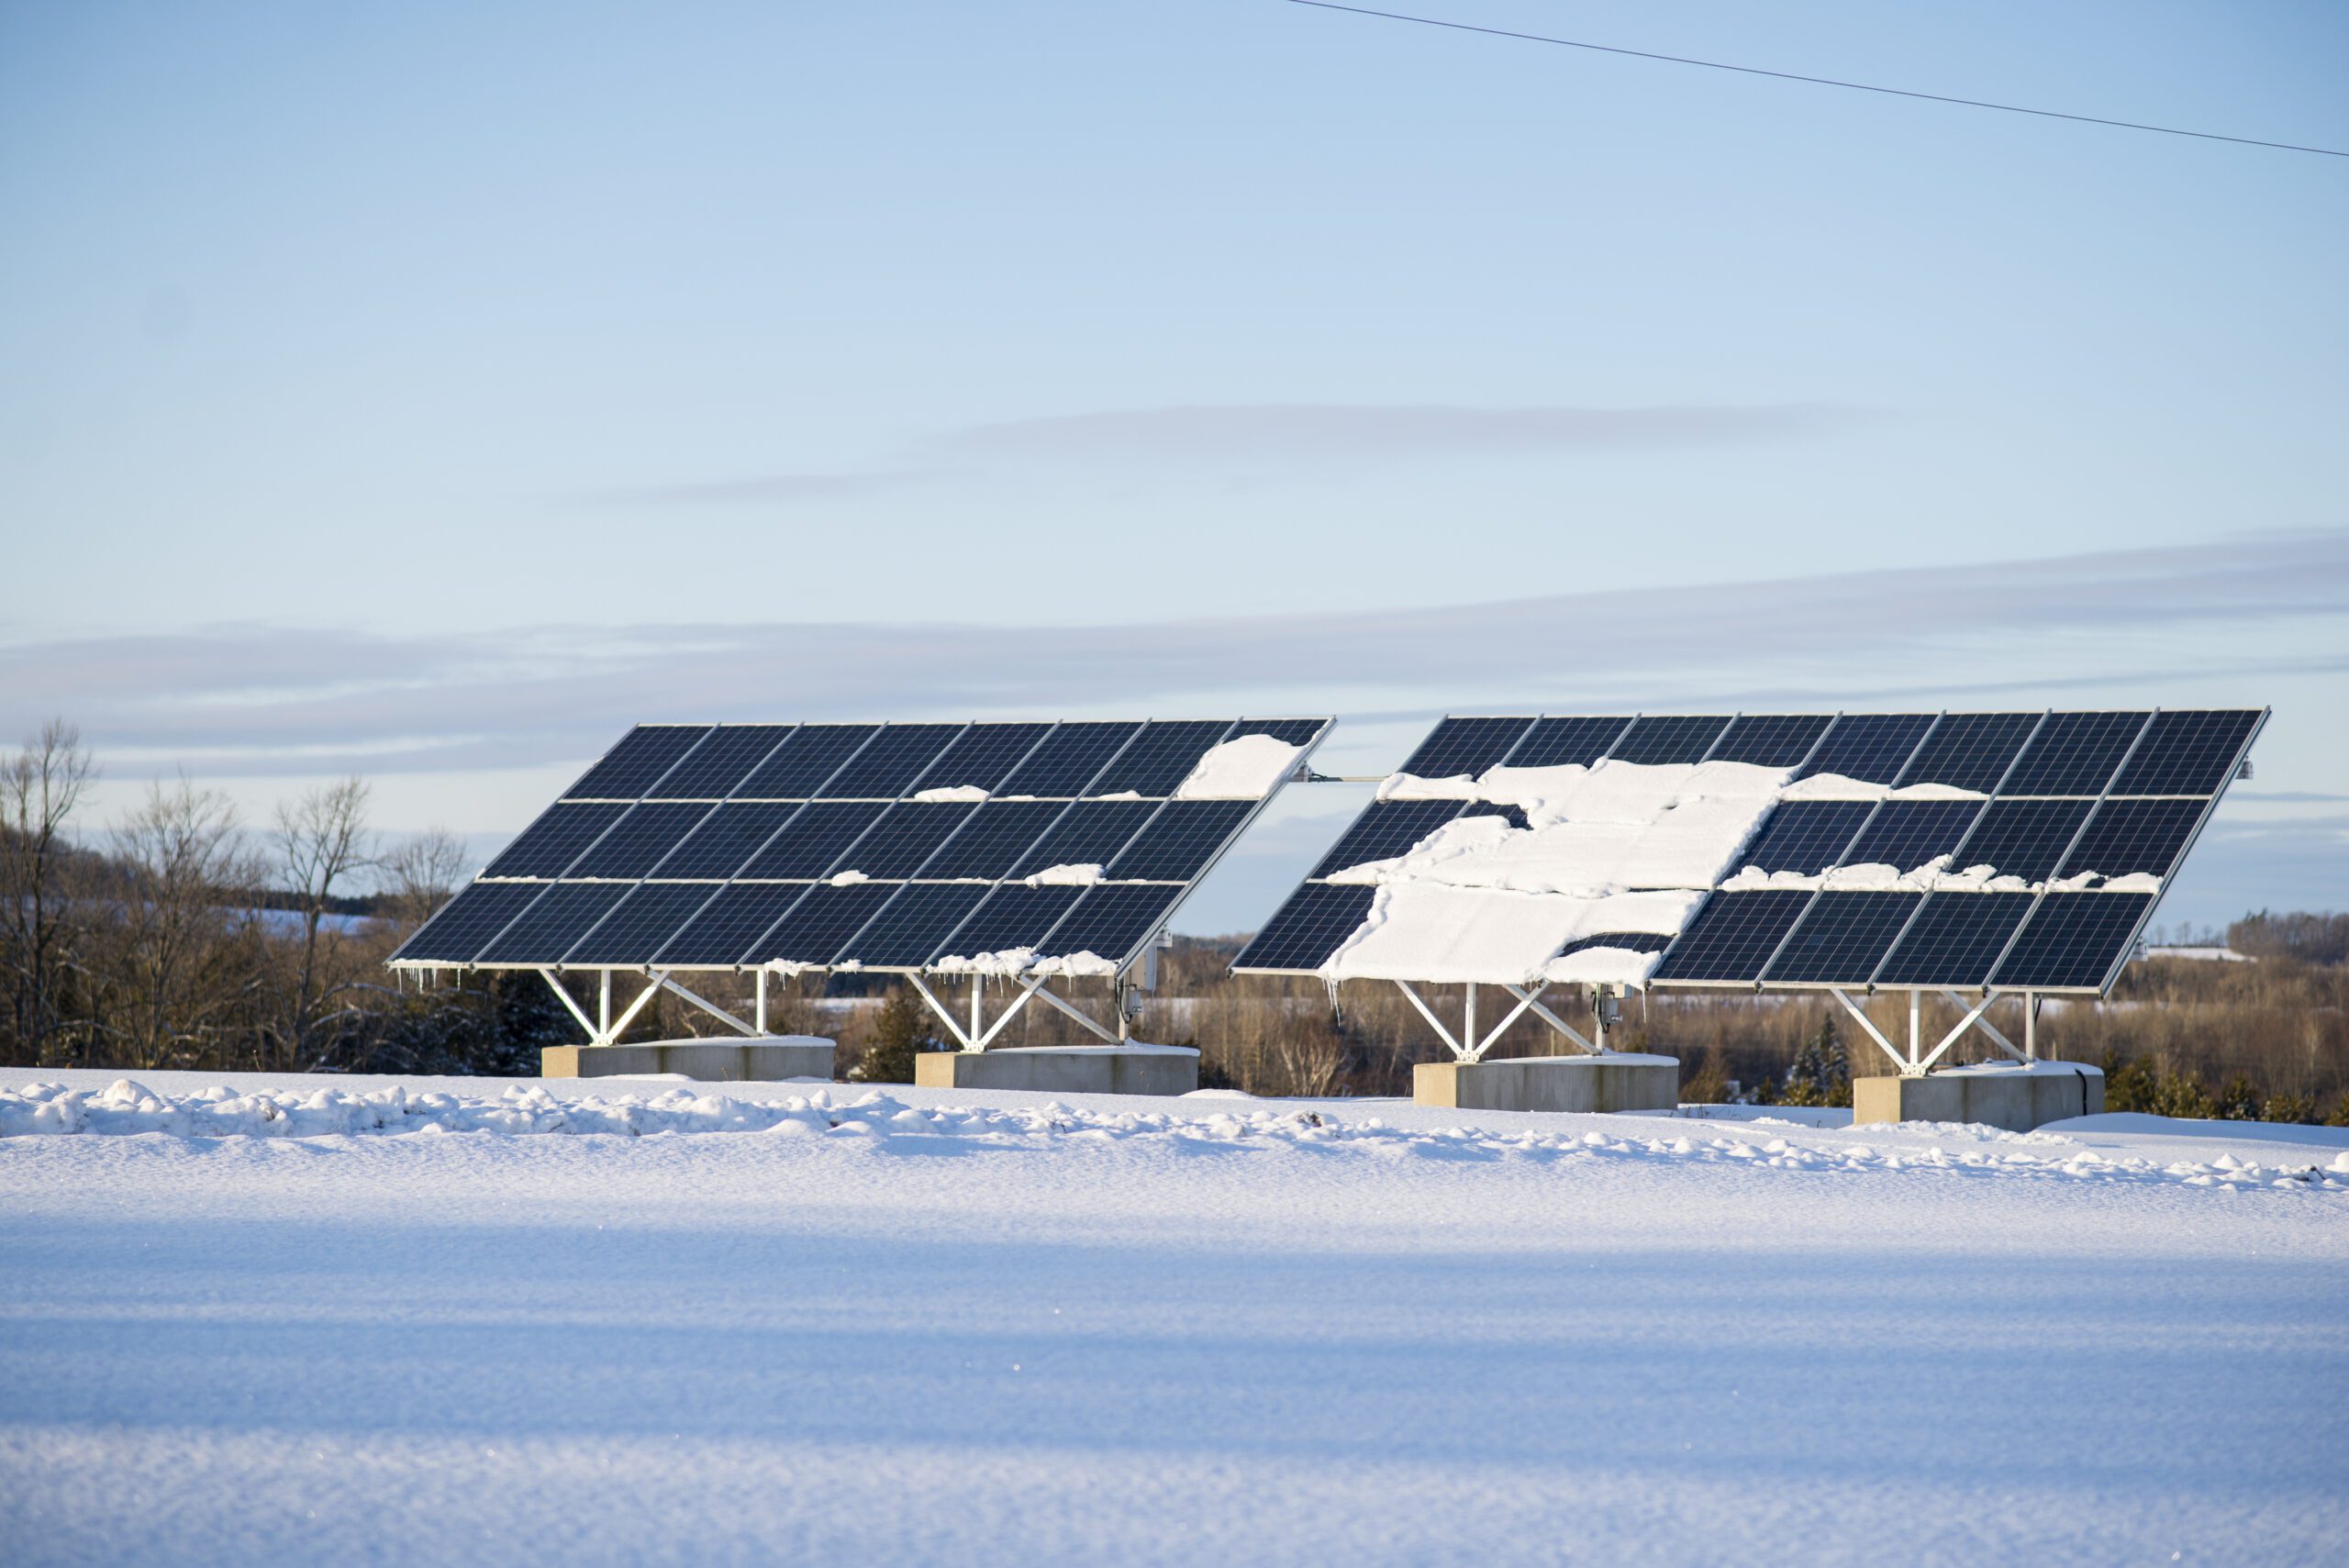 Two rural solar panels with snow on them, supporting an off-grid home in Canada.